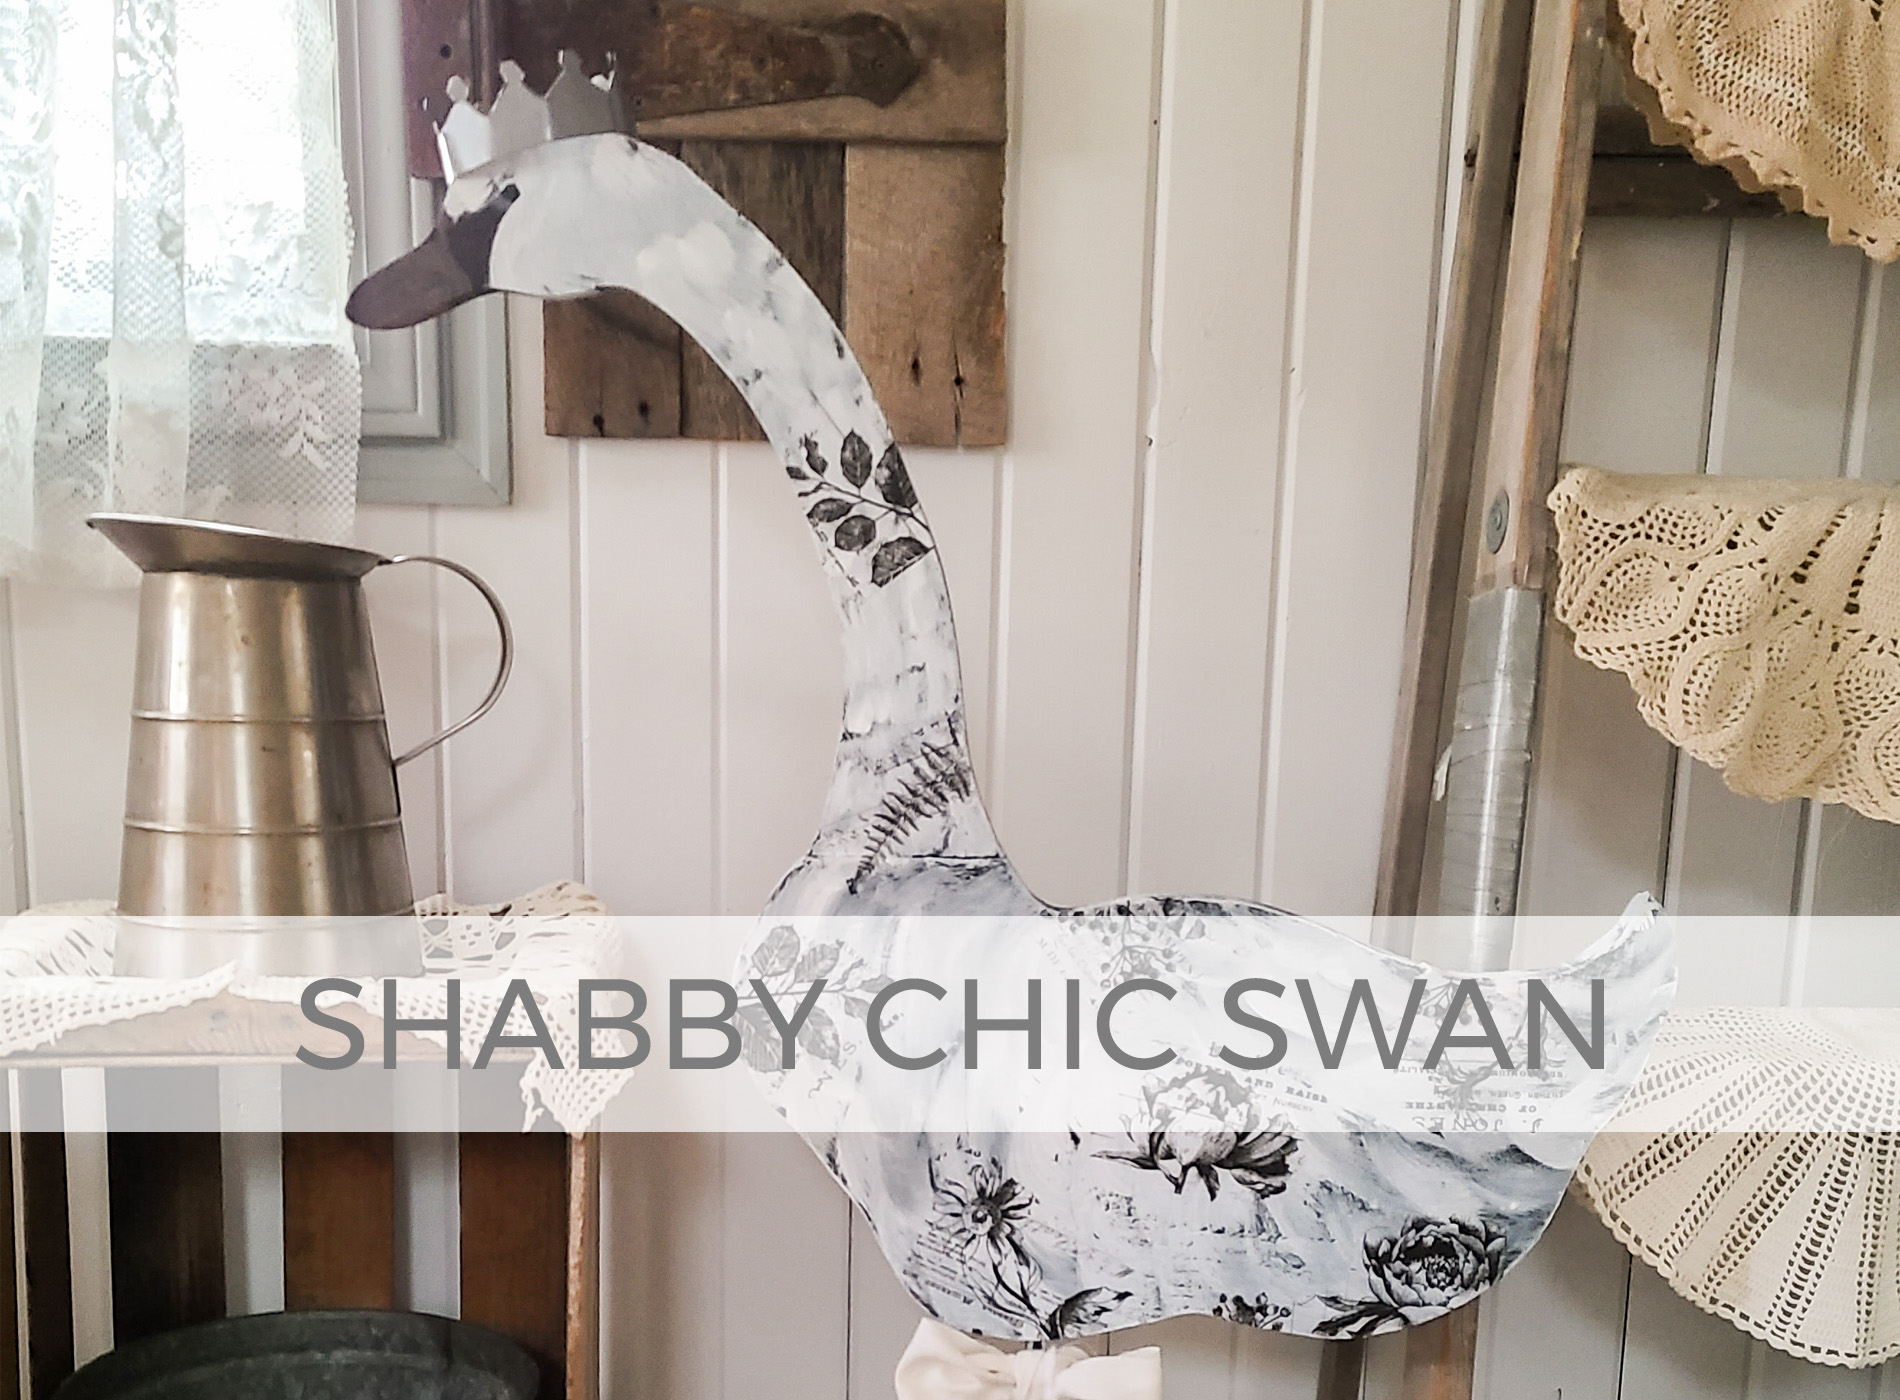 Shabby Chic Swan from Thrifted Goose by Larissa of Prodigal Pieces | prodigalpieces.com #prodigalpieces